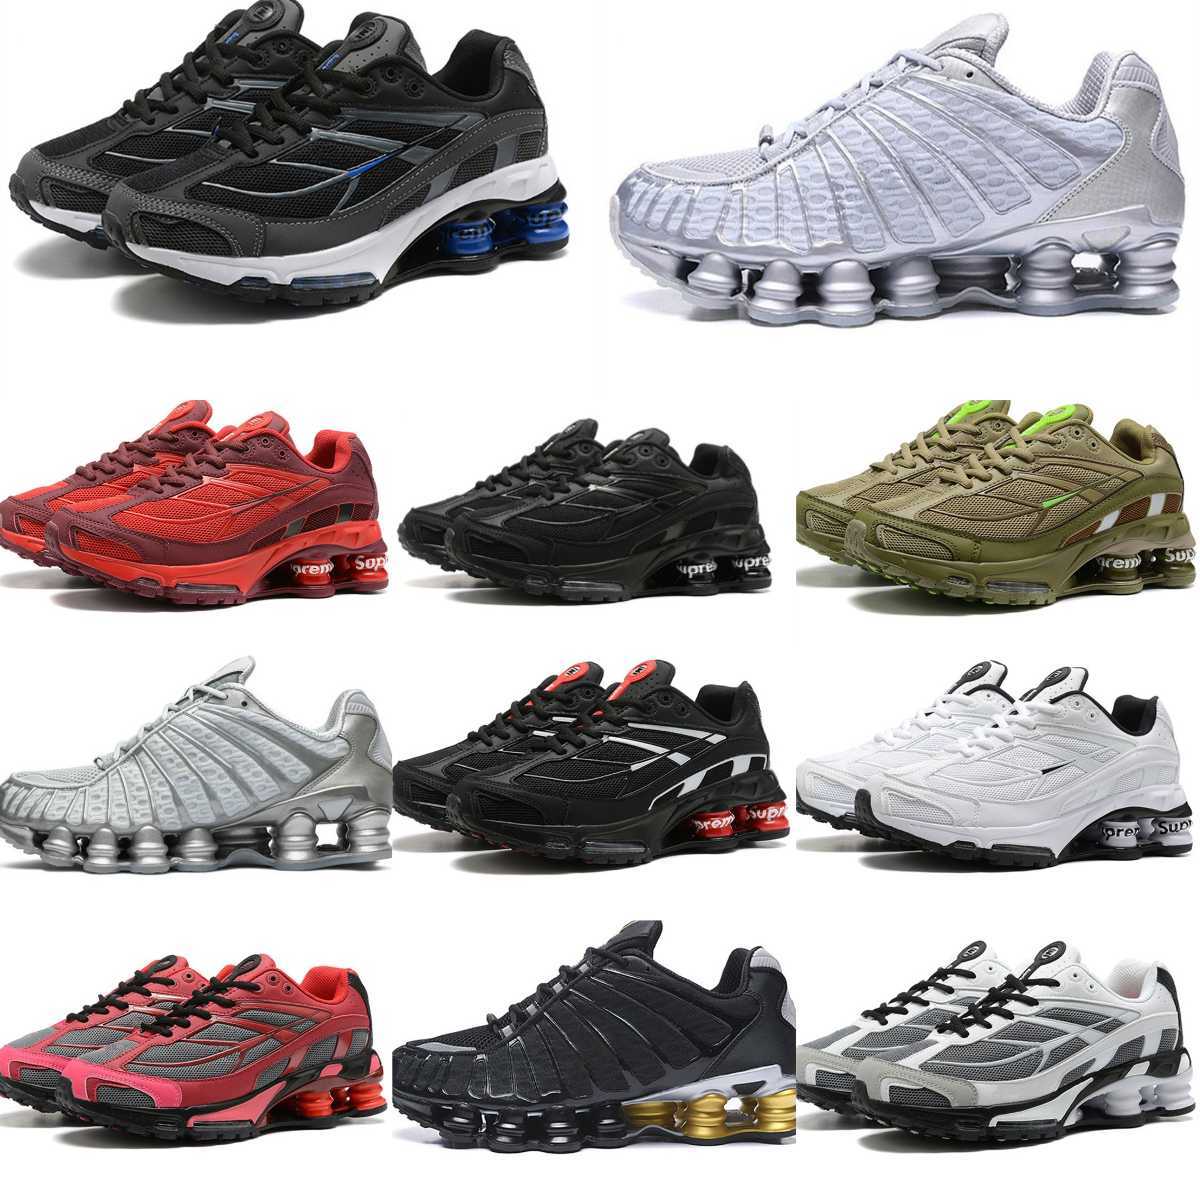 

Trainers Shox Ride 2 Sp Sports Shoes Mens NEW TL R4 301 2.0 Racer Blue Triple BlACK White Red Metallic Silver Shoxs Outdoor DELIVER OZ NZ 802 809 Dark Grey Sneakers S86, Please contact us